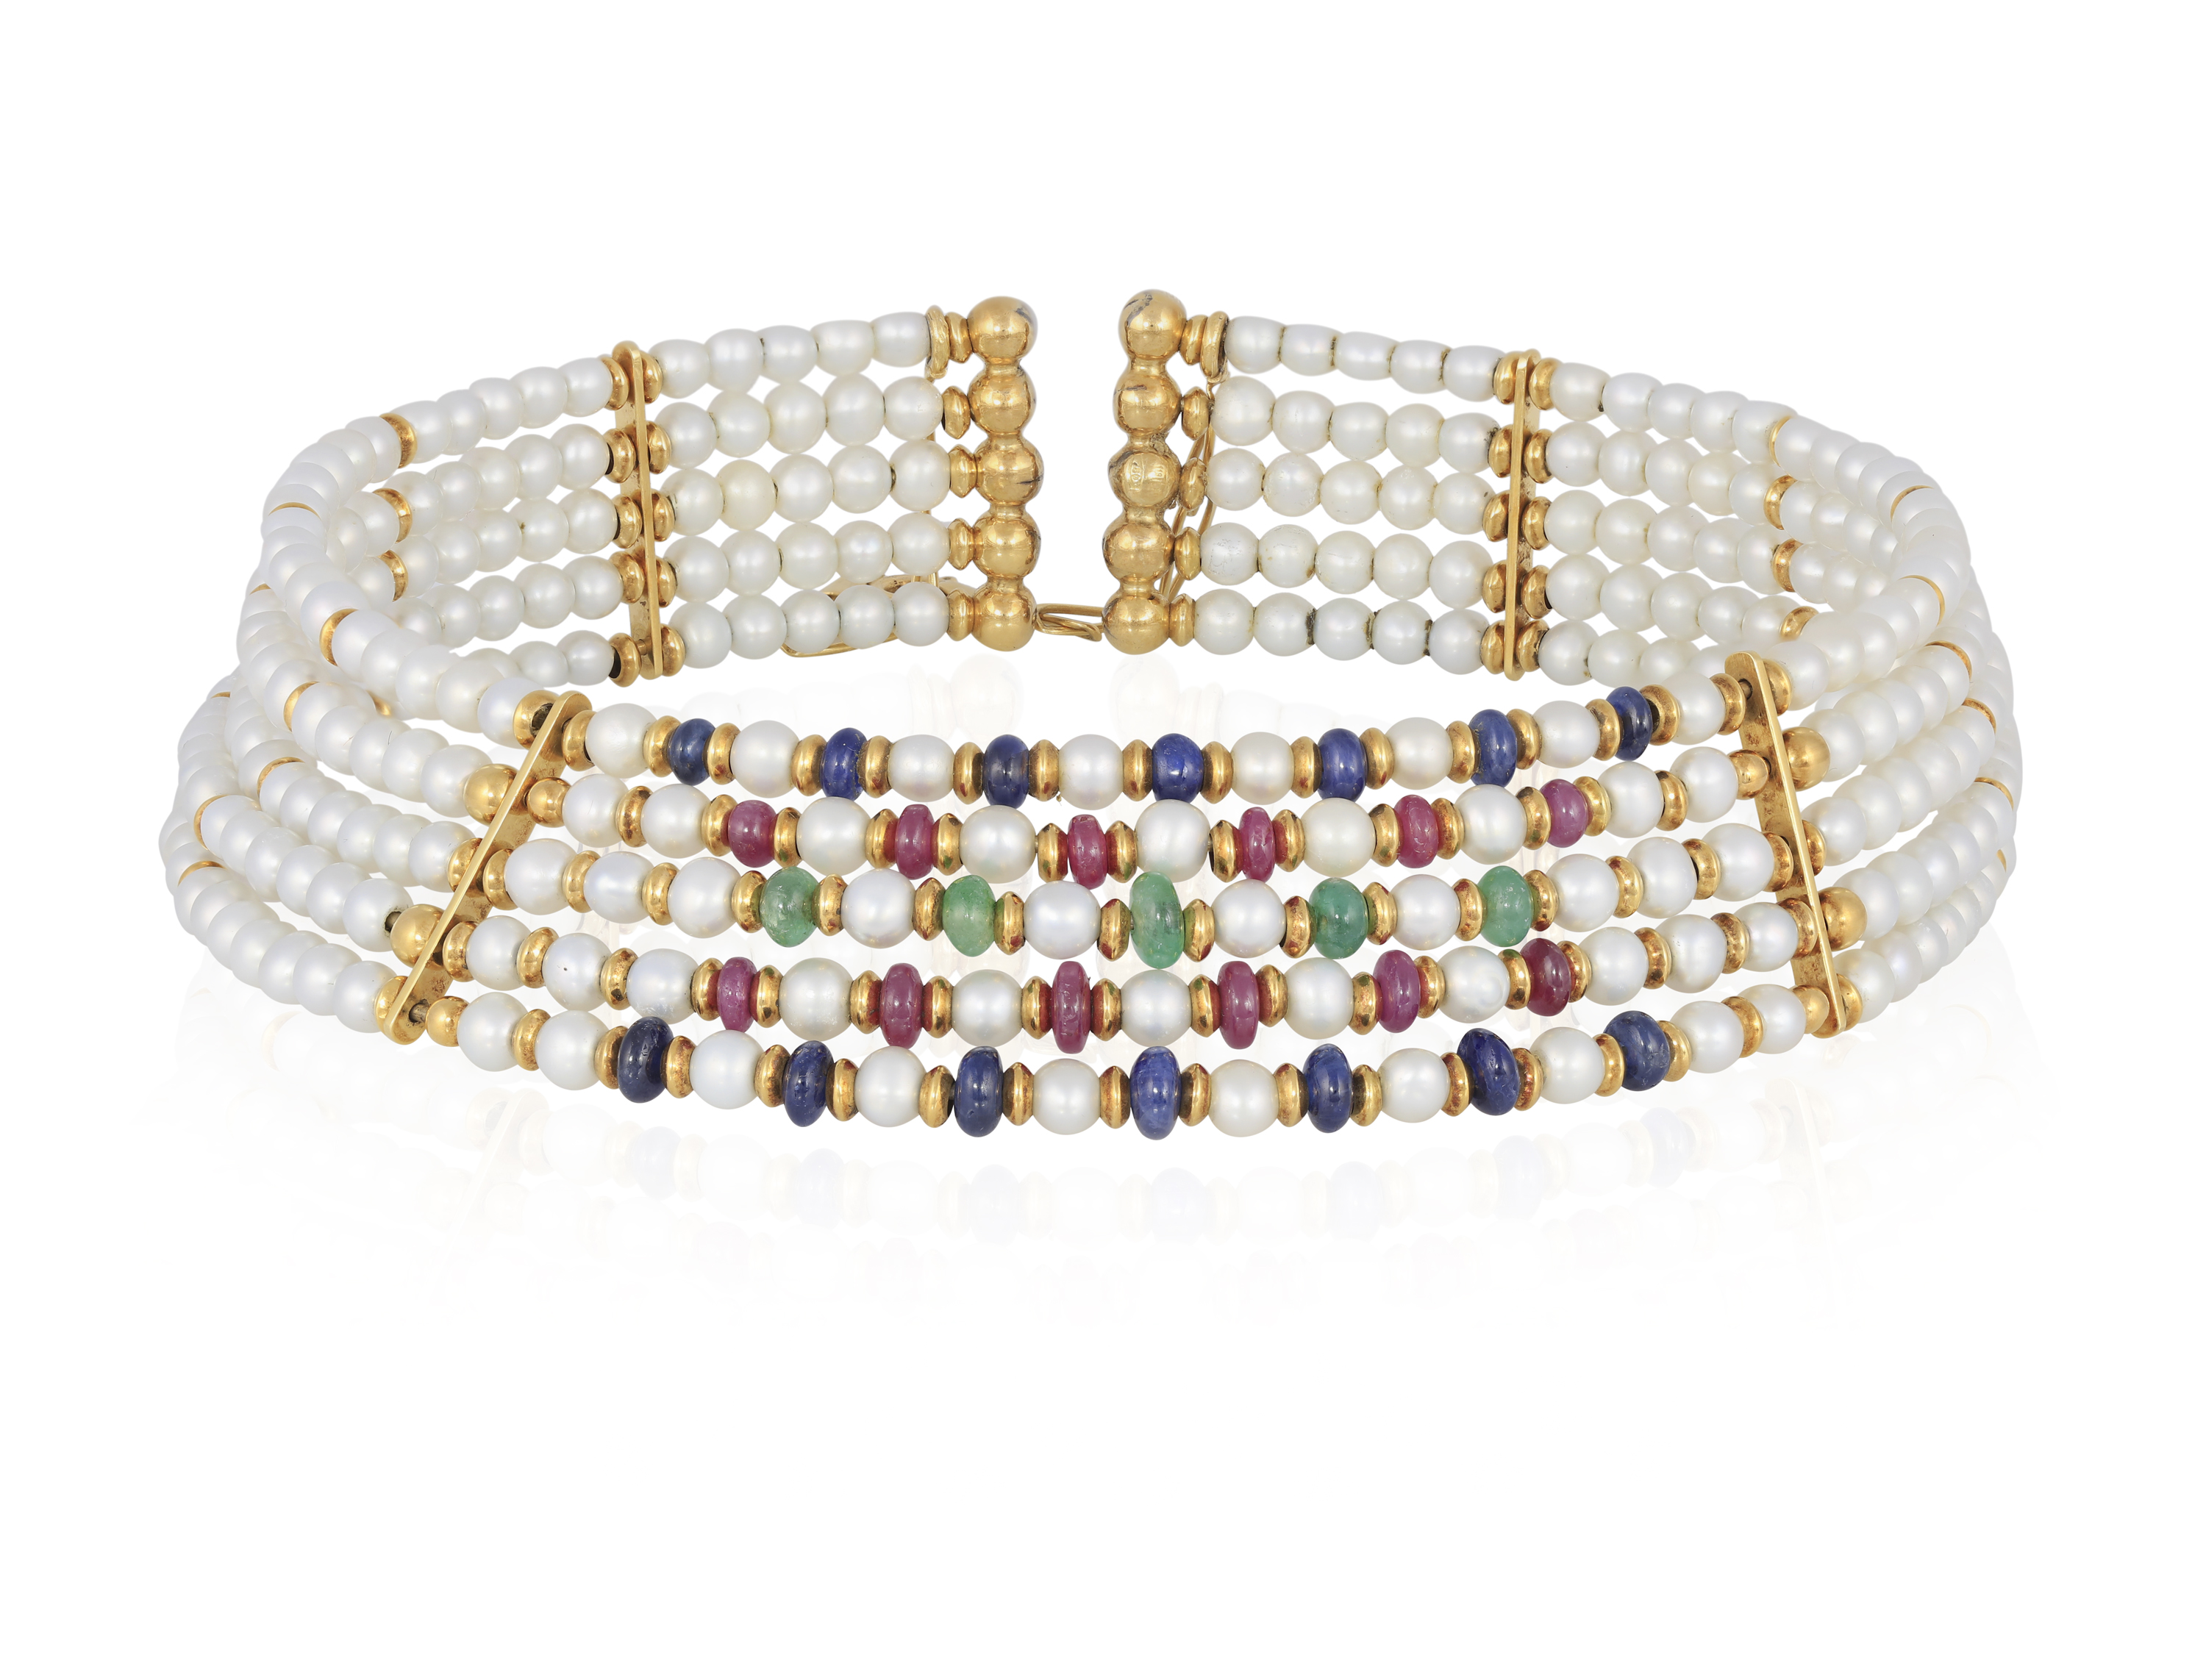 A CULTURED PEARL AND GEM-SET CHOKER, the sprung collar designed as five rows of cultured pearls,